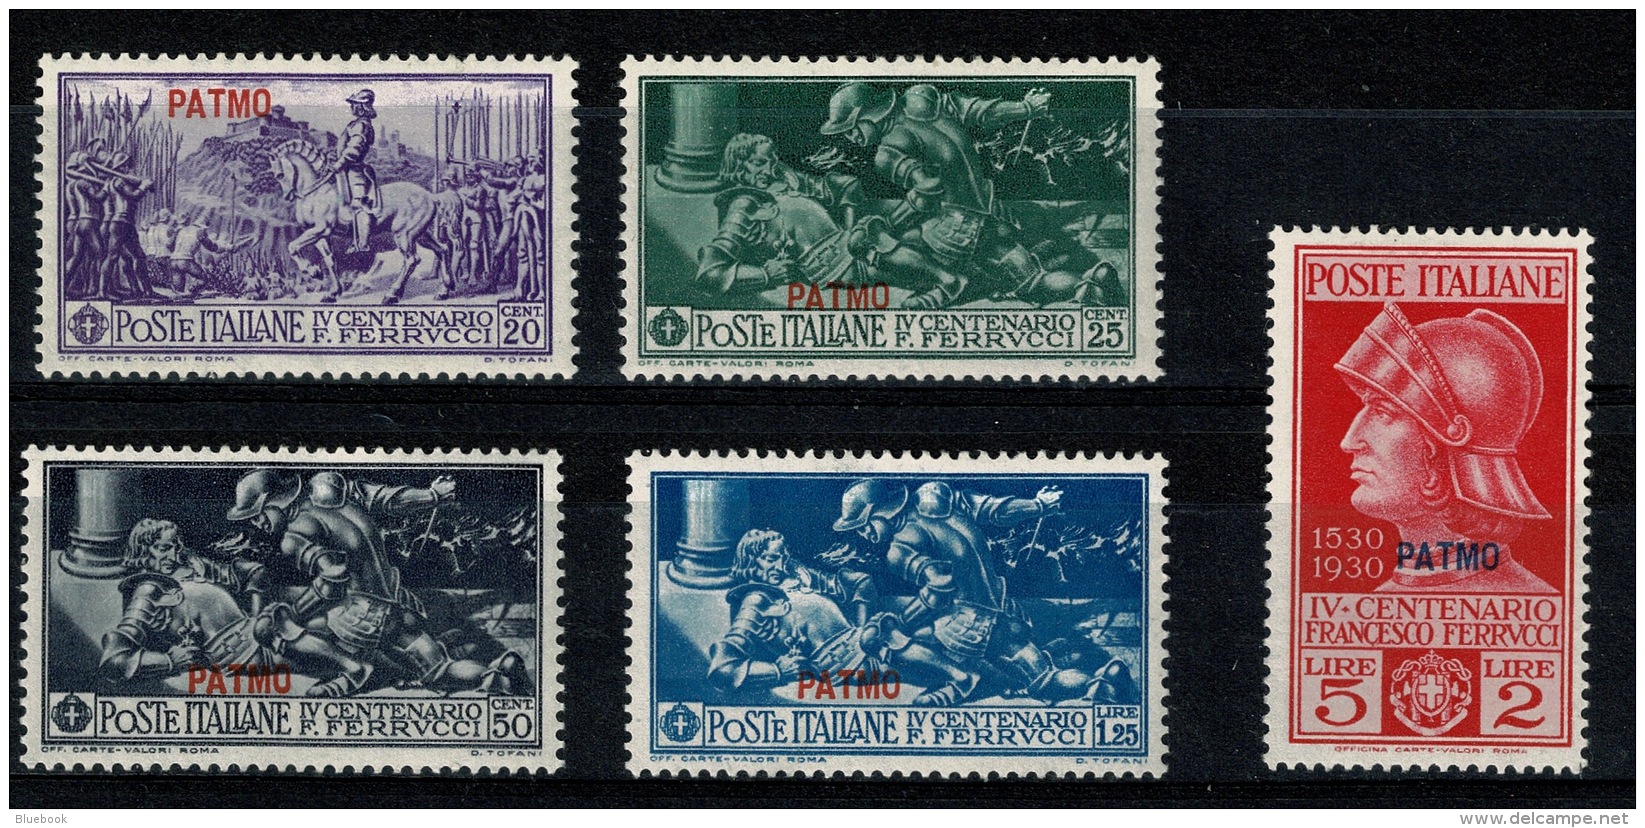 RB 1226 -  Italy Aegean Egeo Dodecanese - 1930 Ferrucci Set Of 5 Mint Stamps Patmos Patmo - Aegean (Patmo)